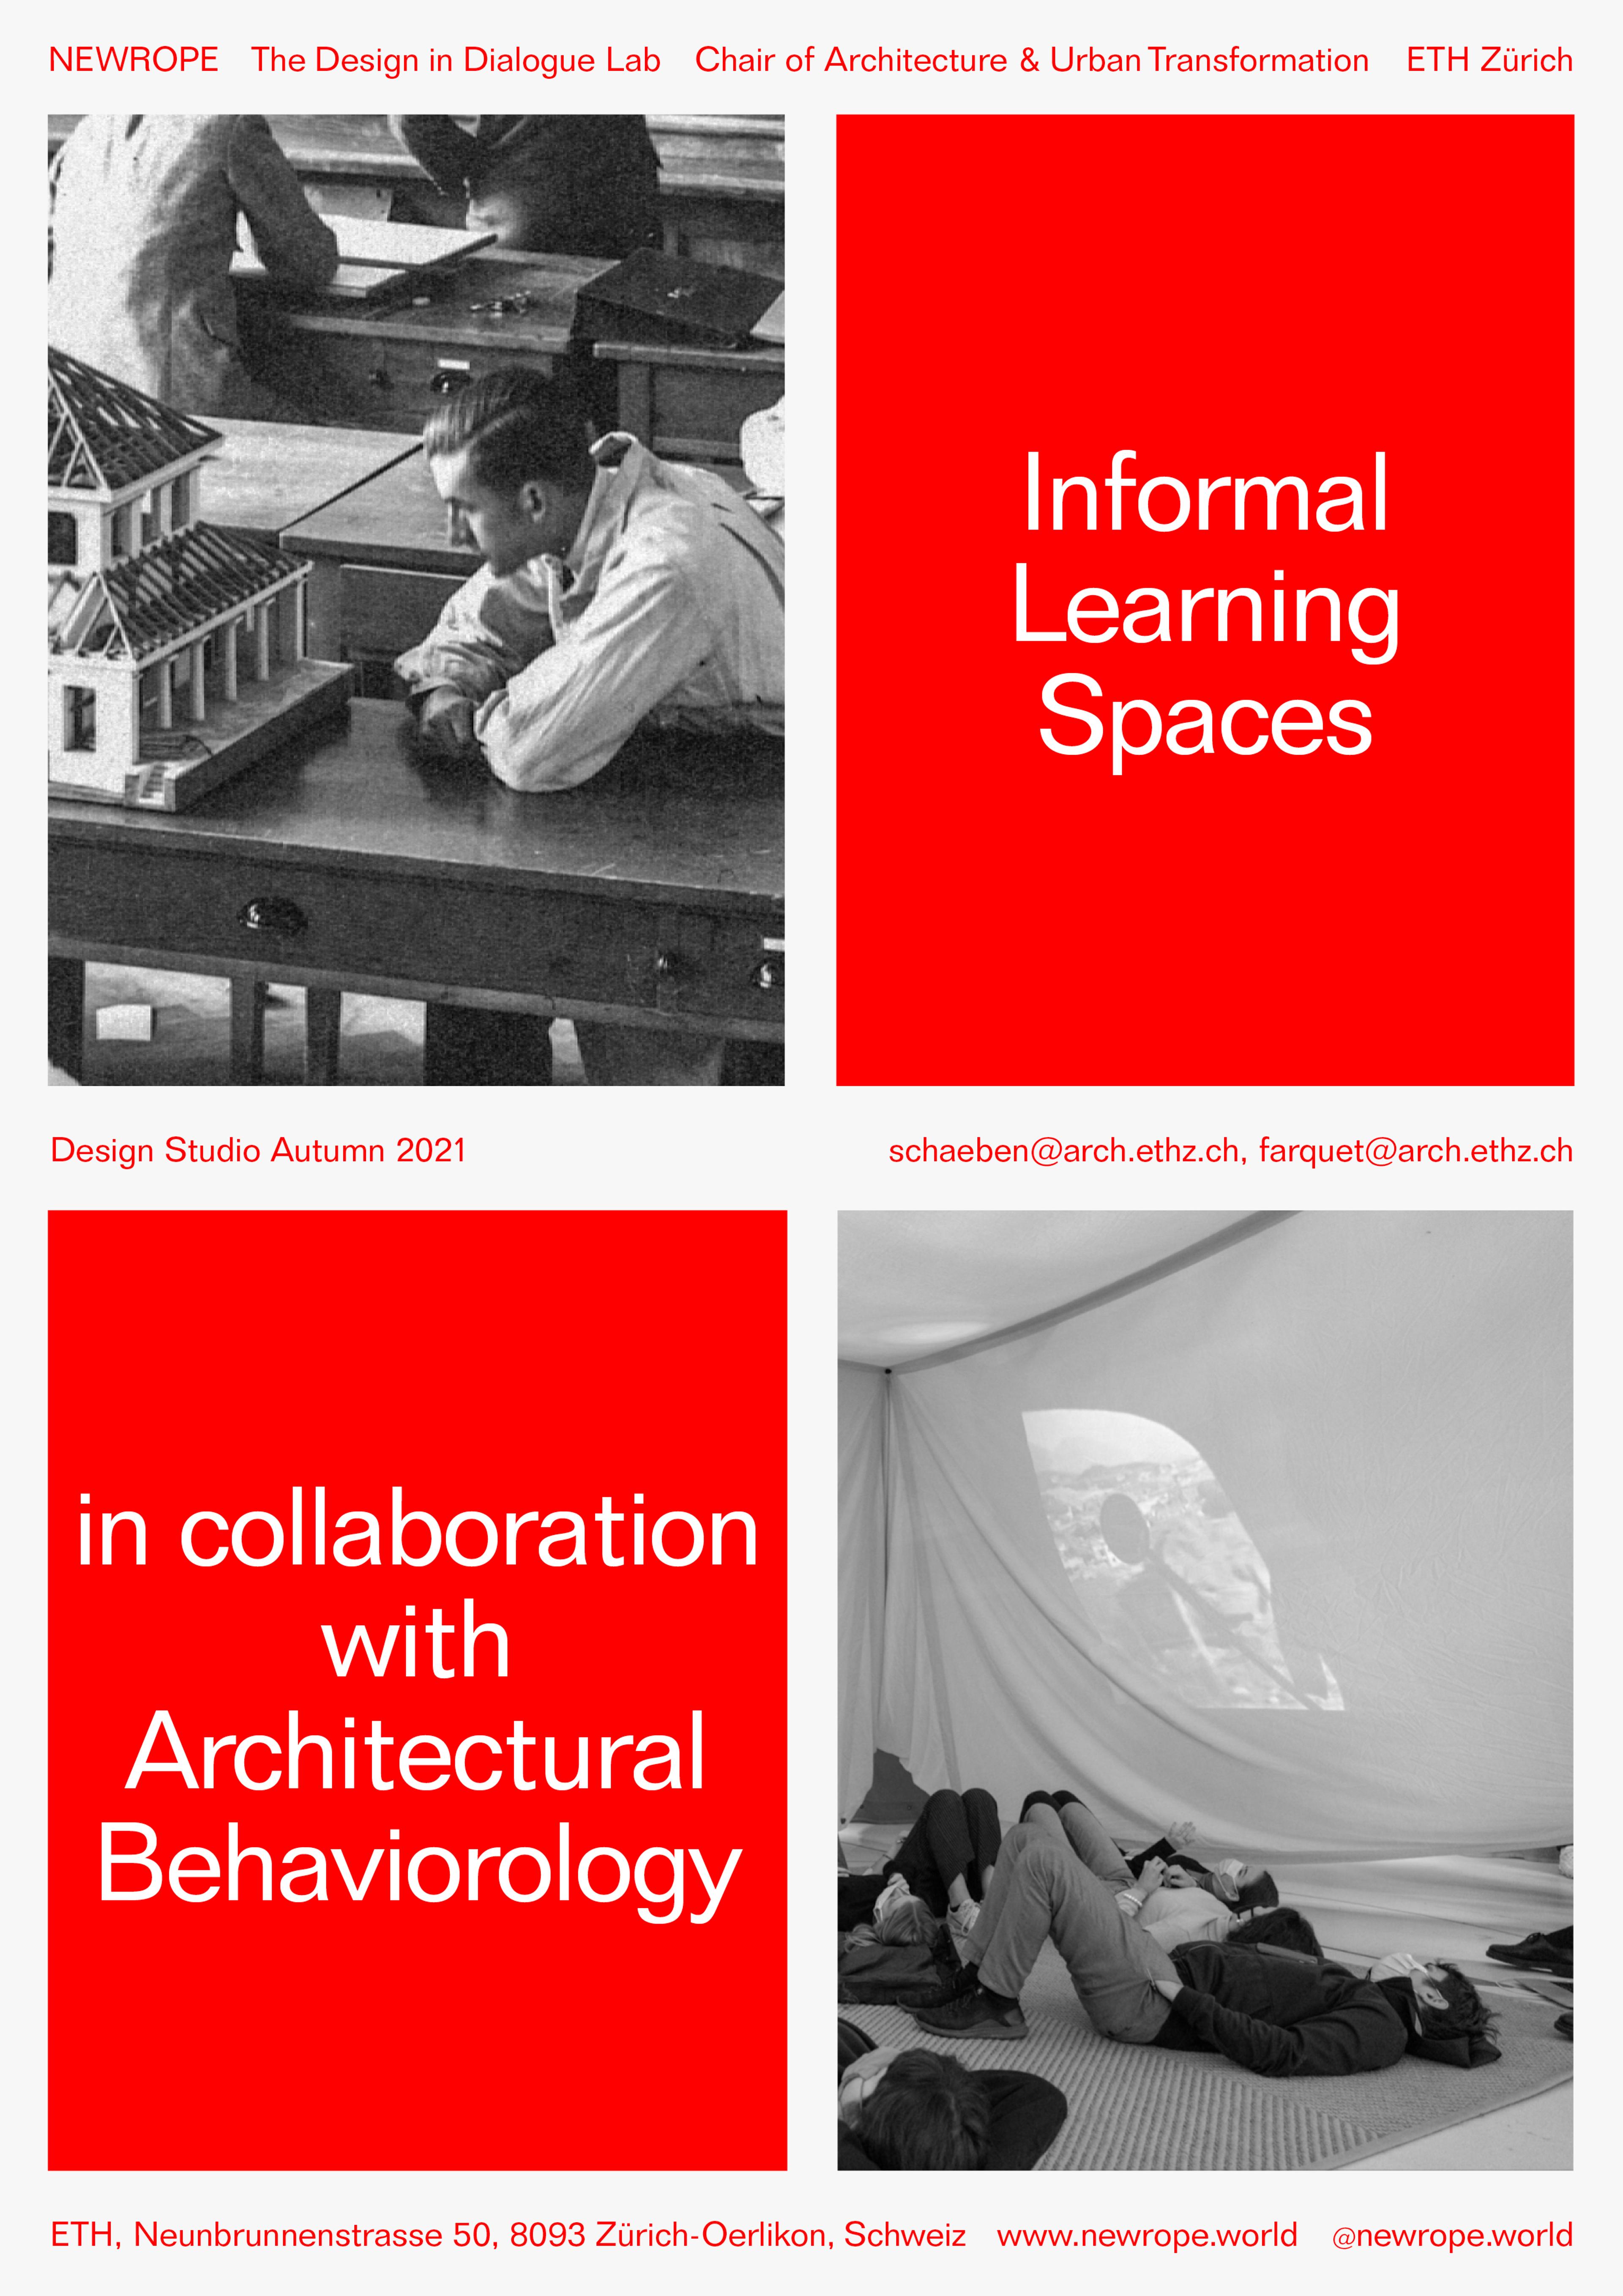 Announcement: Studio Informal Learning Spaces